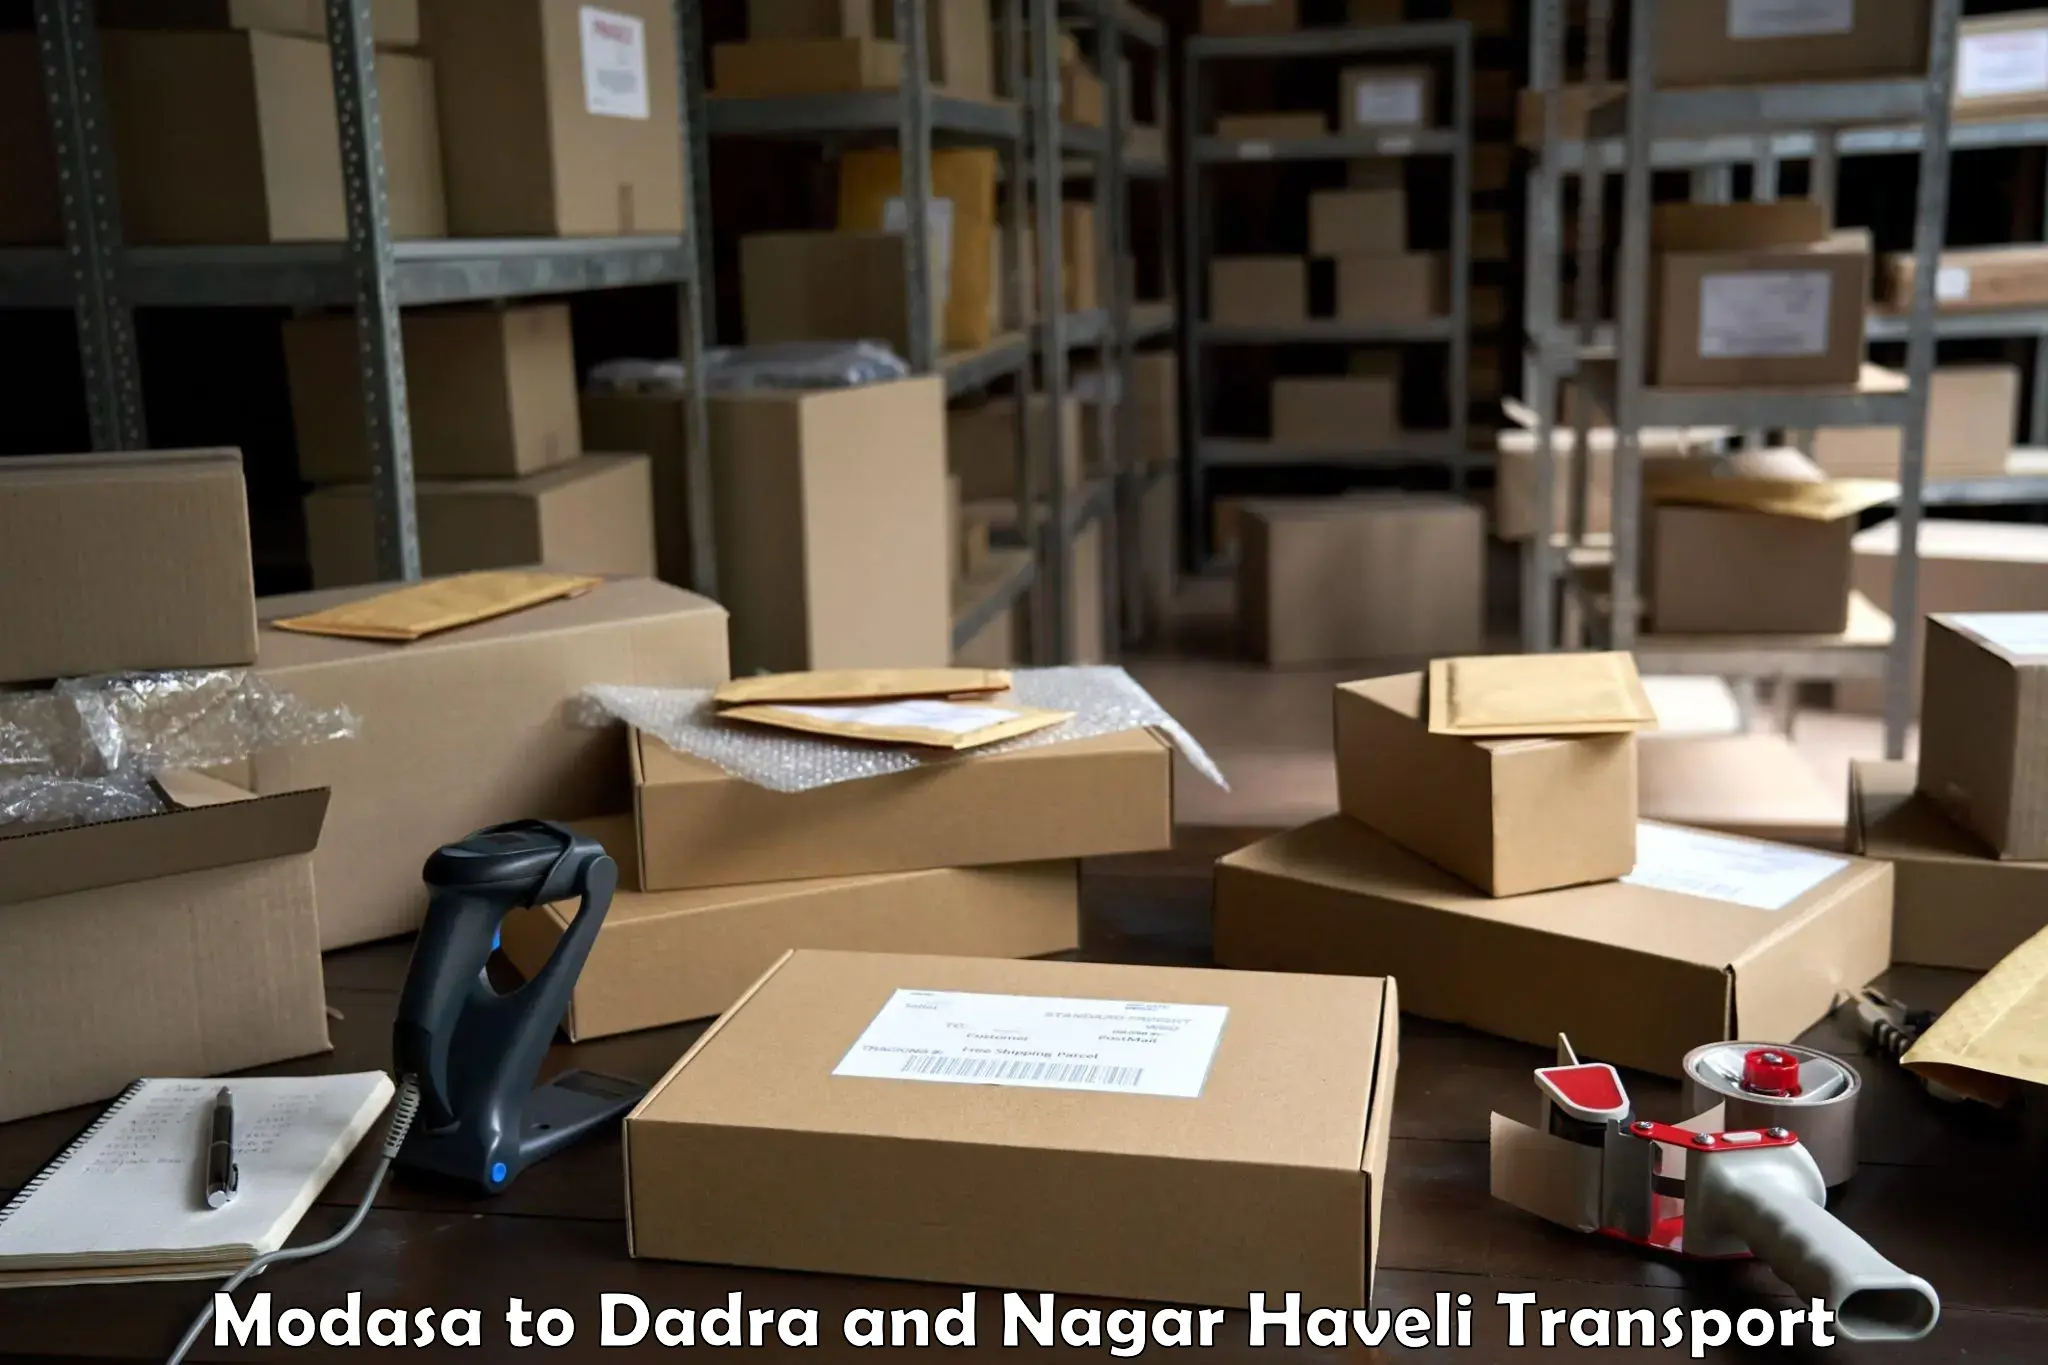 Daily parcel service transport in Modasa to Dadra and Nagar Haveli